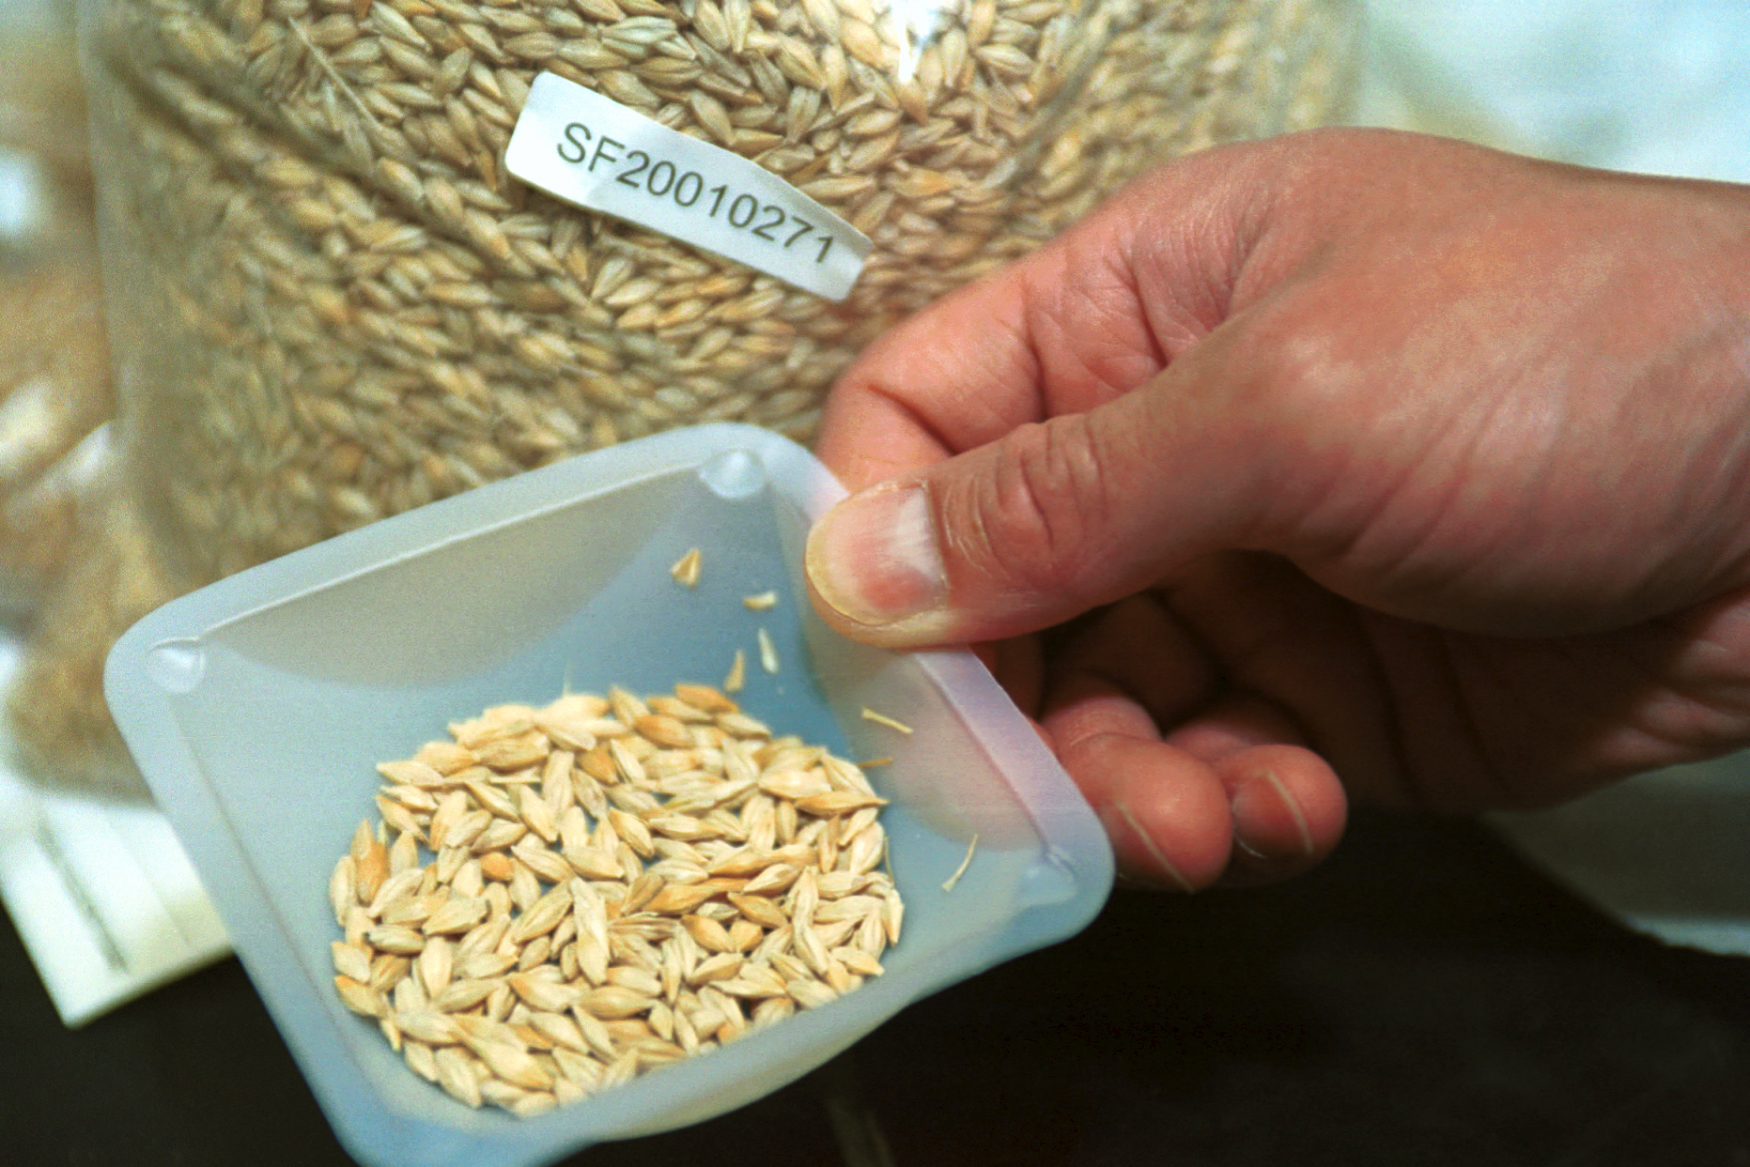 Grains are tested before being allowed into the U.S.